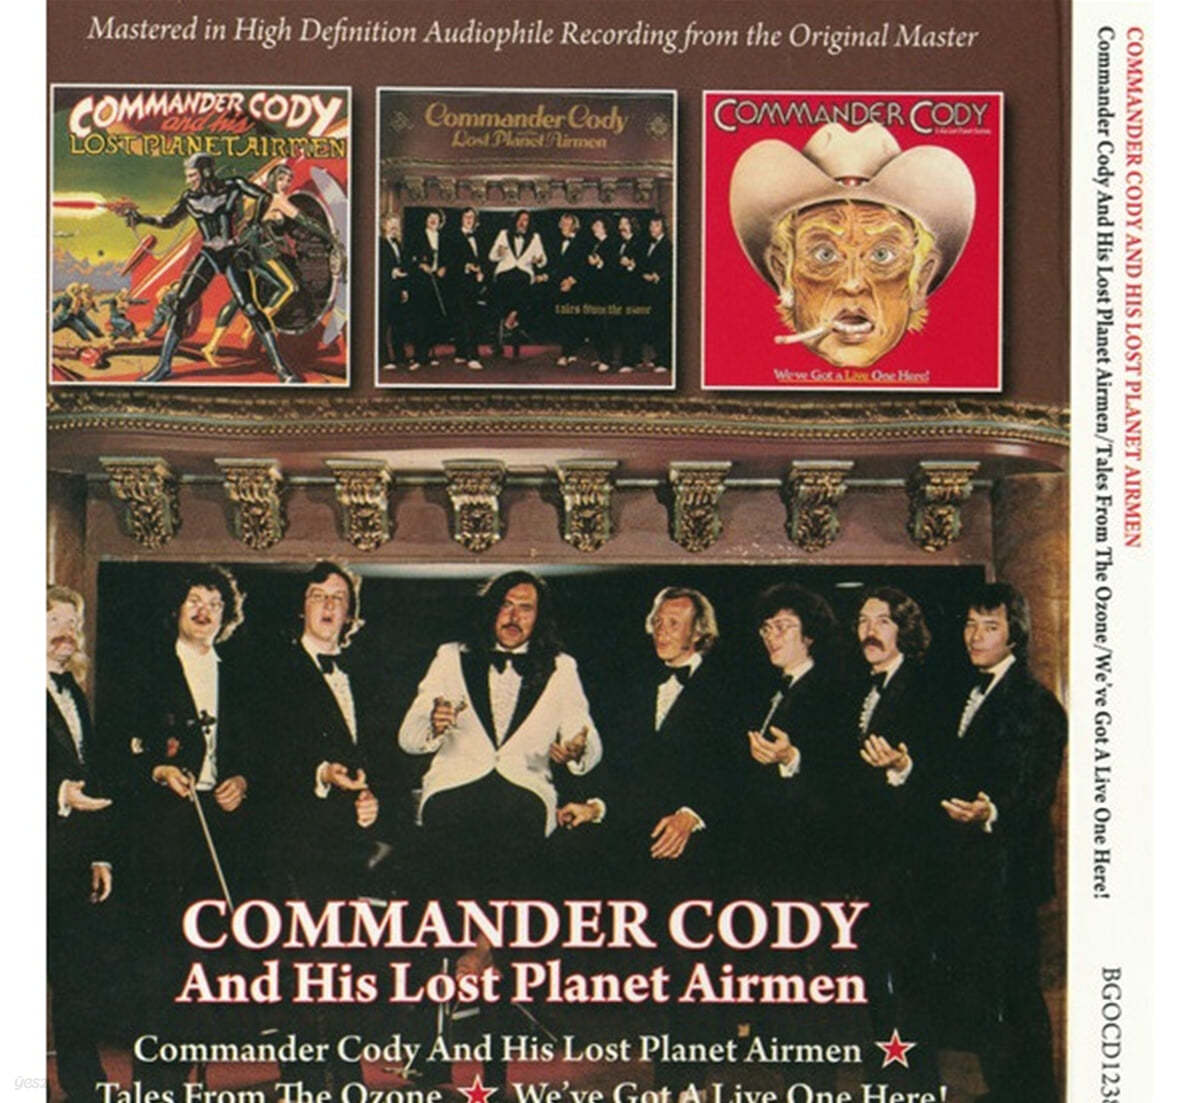 Commander Cody (코맨더 코디) - Commander Cody And His Lost Planet Airmen / Tales From The Ozone / We've Got A Live One Here! 